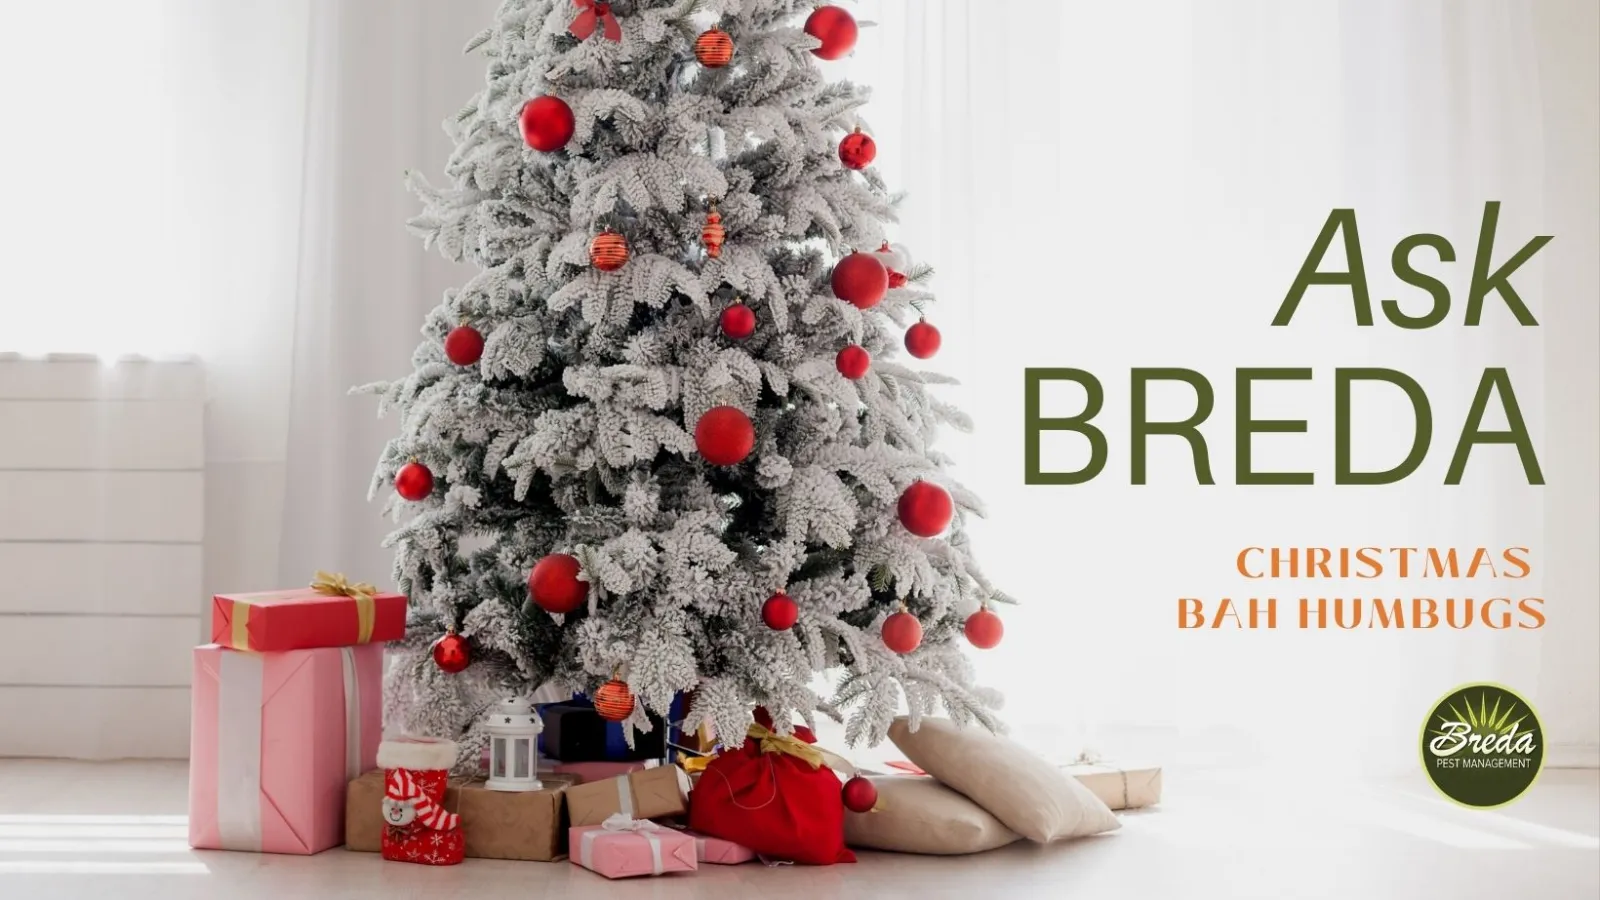 breda offers pest management services in atlanta during the christmas season